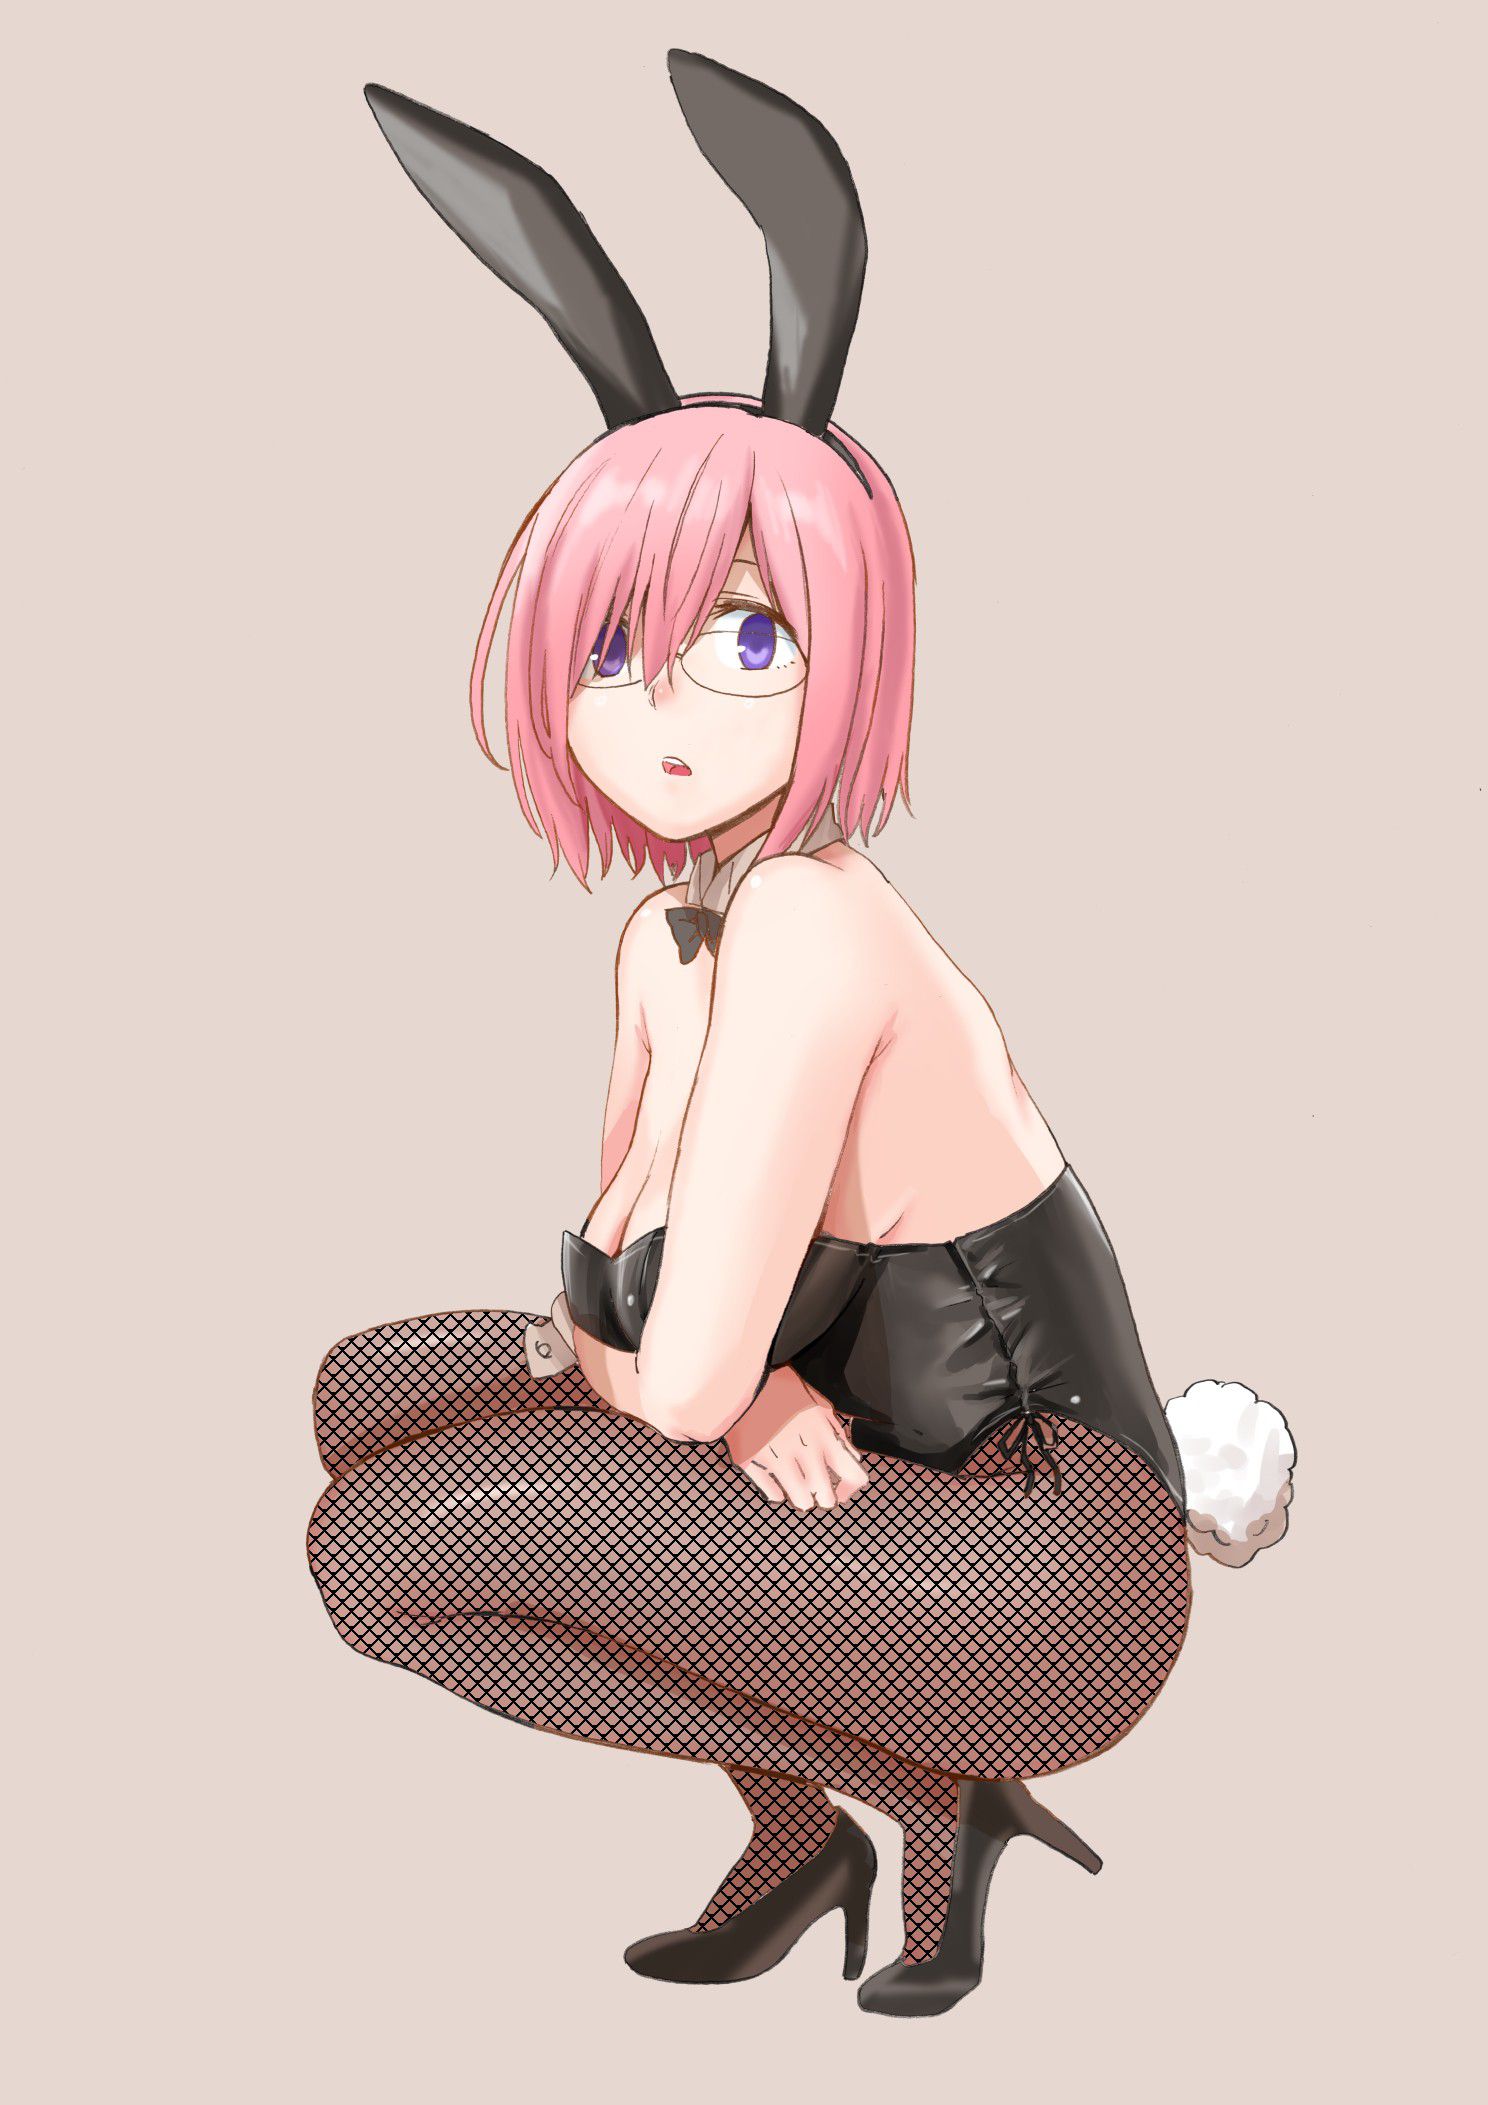 【Secondary erotic】 The secondary dosquebe image of a girl dressed in a bunny girl costume that stands out for the dosukebe of the buttocks and pie is here 15